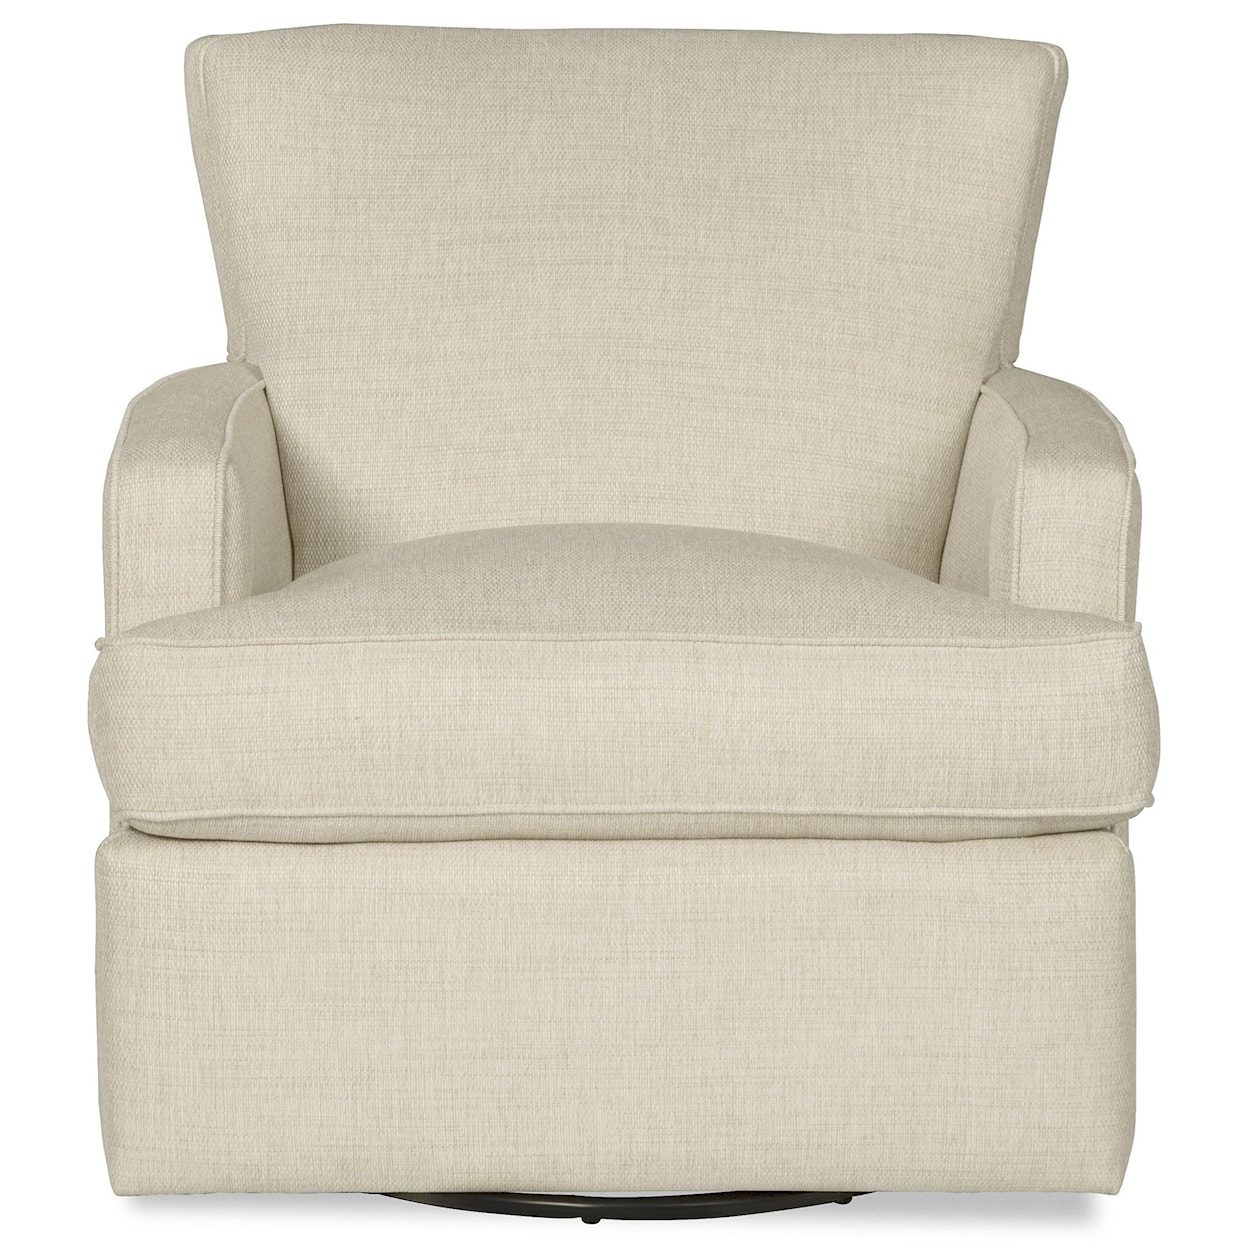 Hickory Craft 003510 Swivel Chair